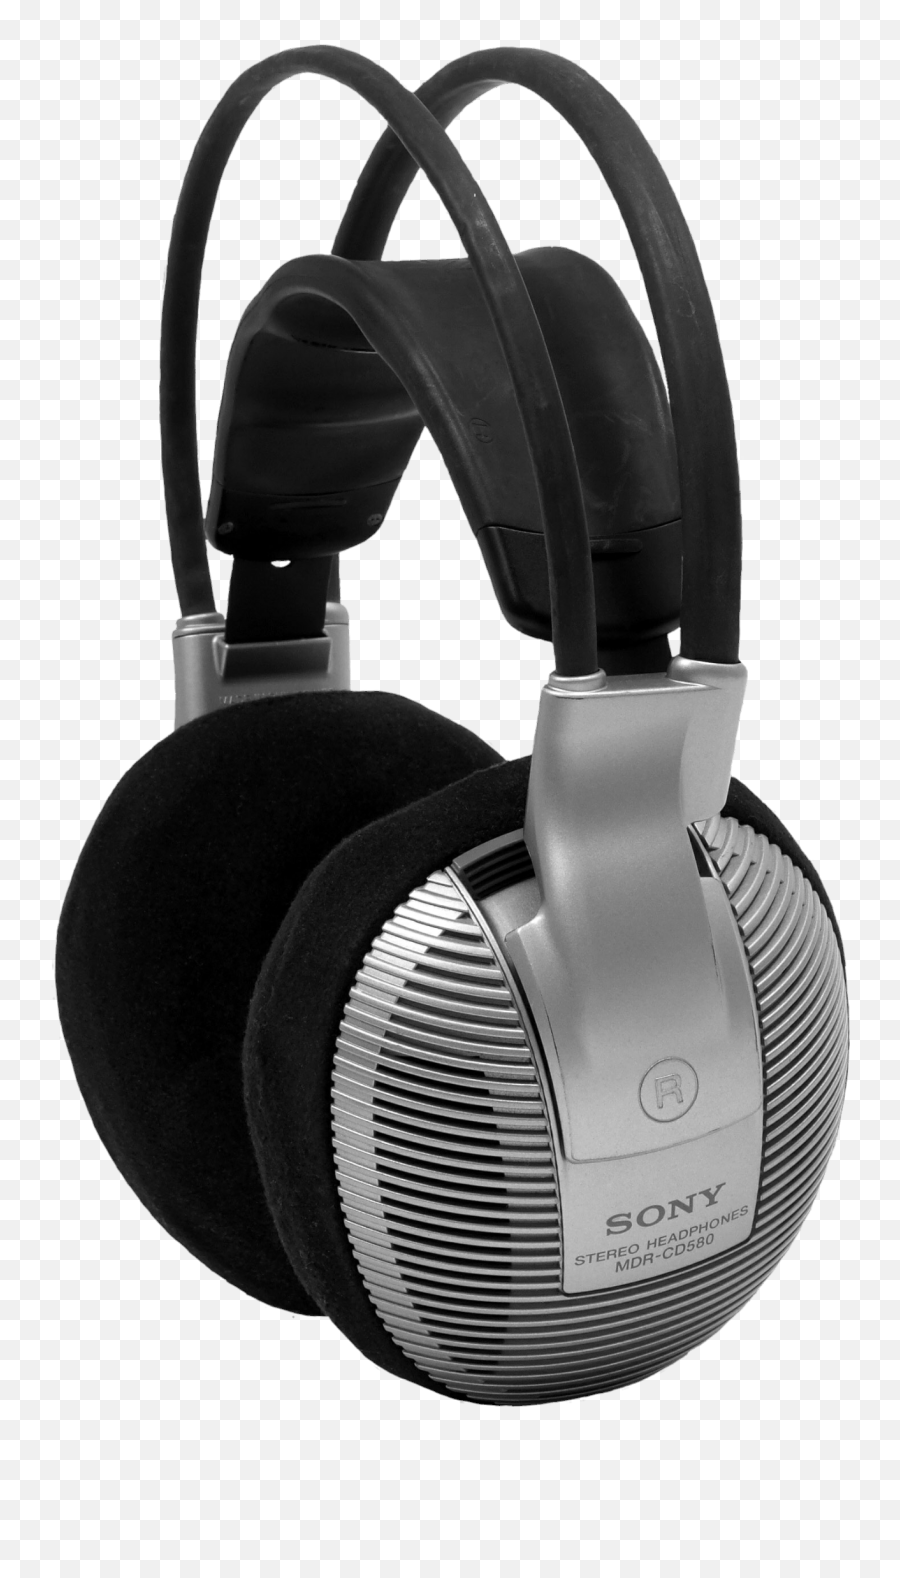 Headphones Music Grey - Connect Headphone To Pc With Blueetooth Emoji,Headphones That Use Emotions